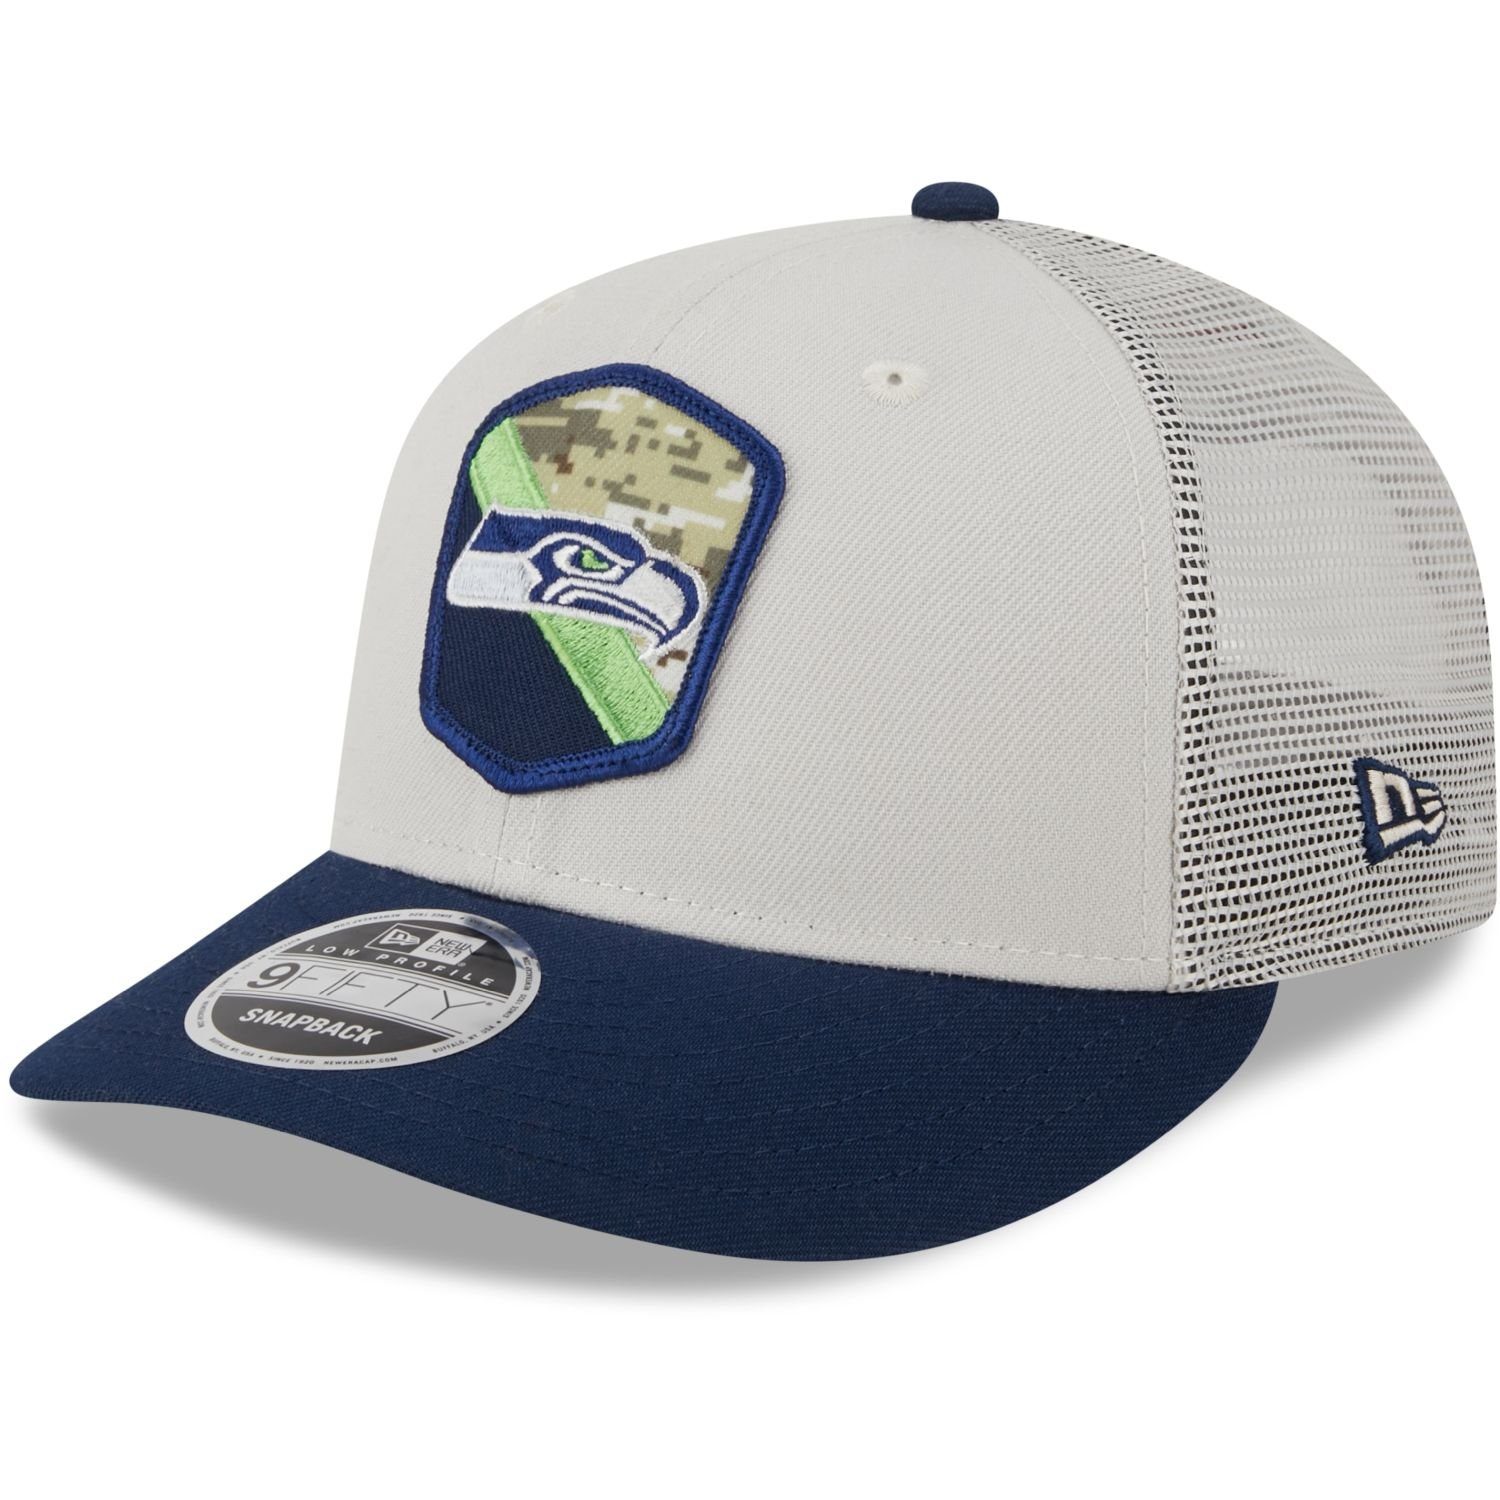 New Salute Seahawks Low Snapback to Profile Snap Seattle 9Fifty Service Cap NFL Era